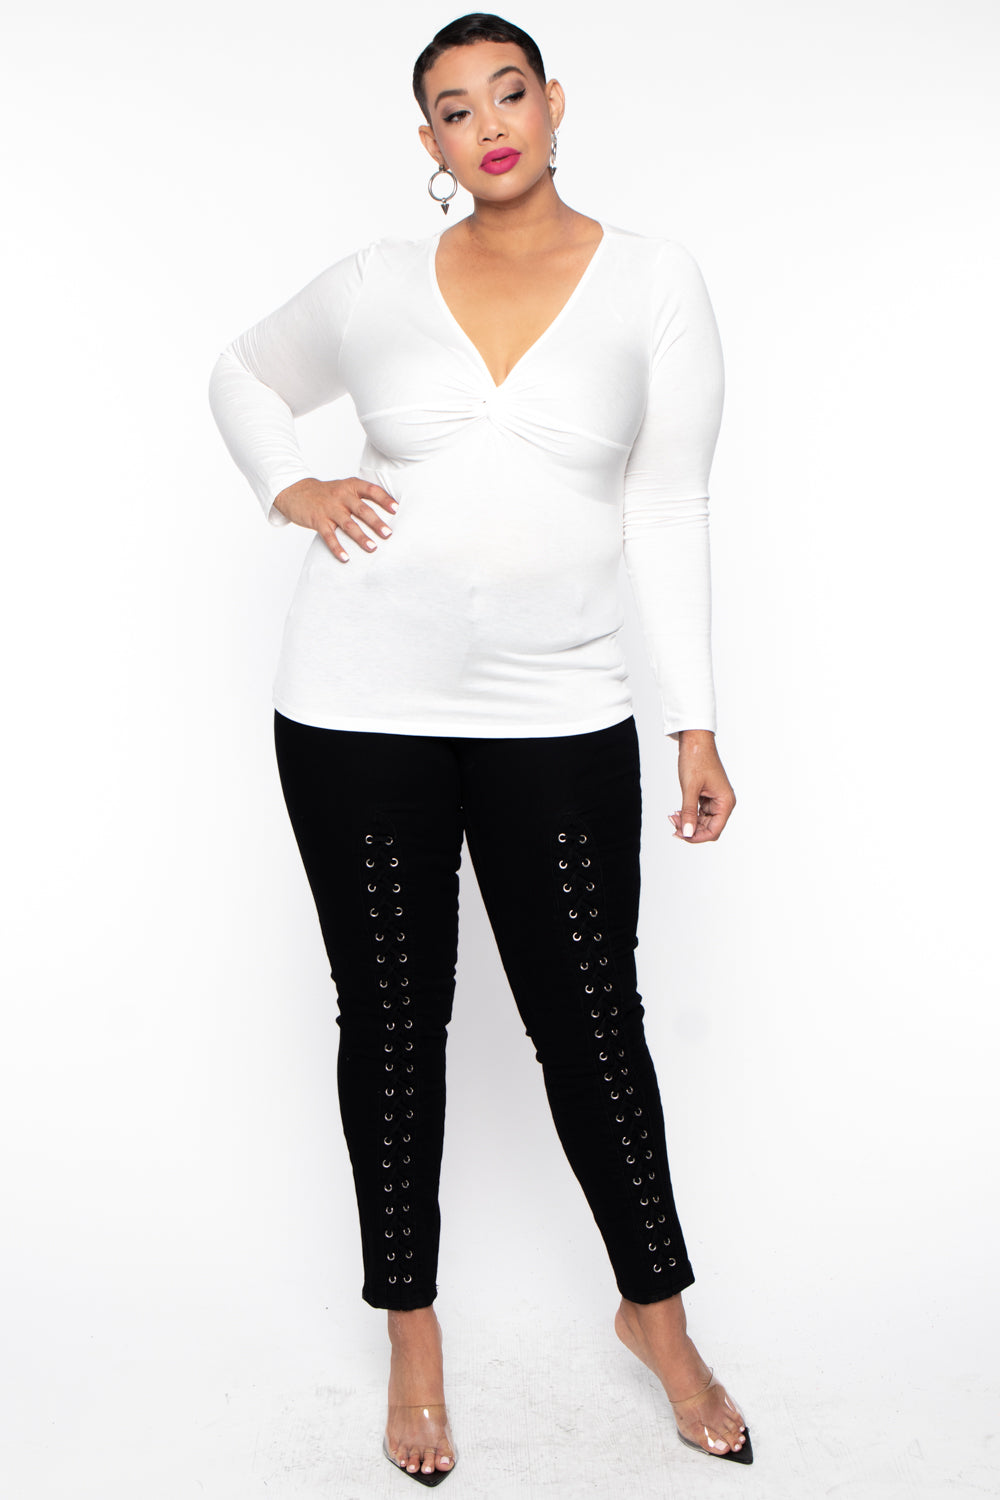 Ambiance Tops Plus Size Twist Front Top - Ivory